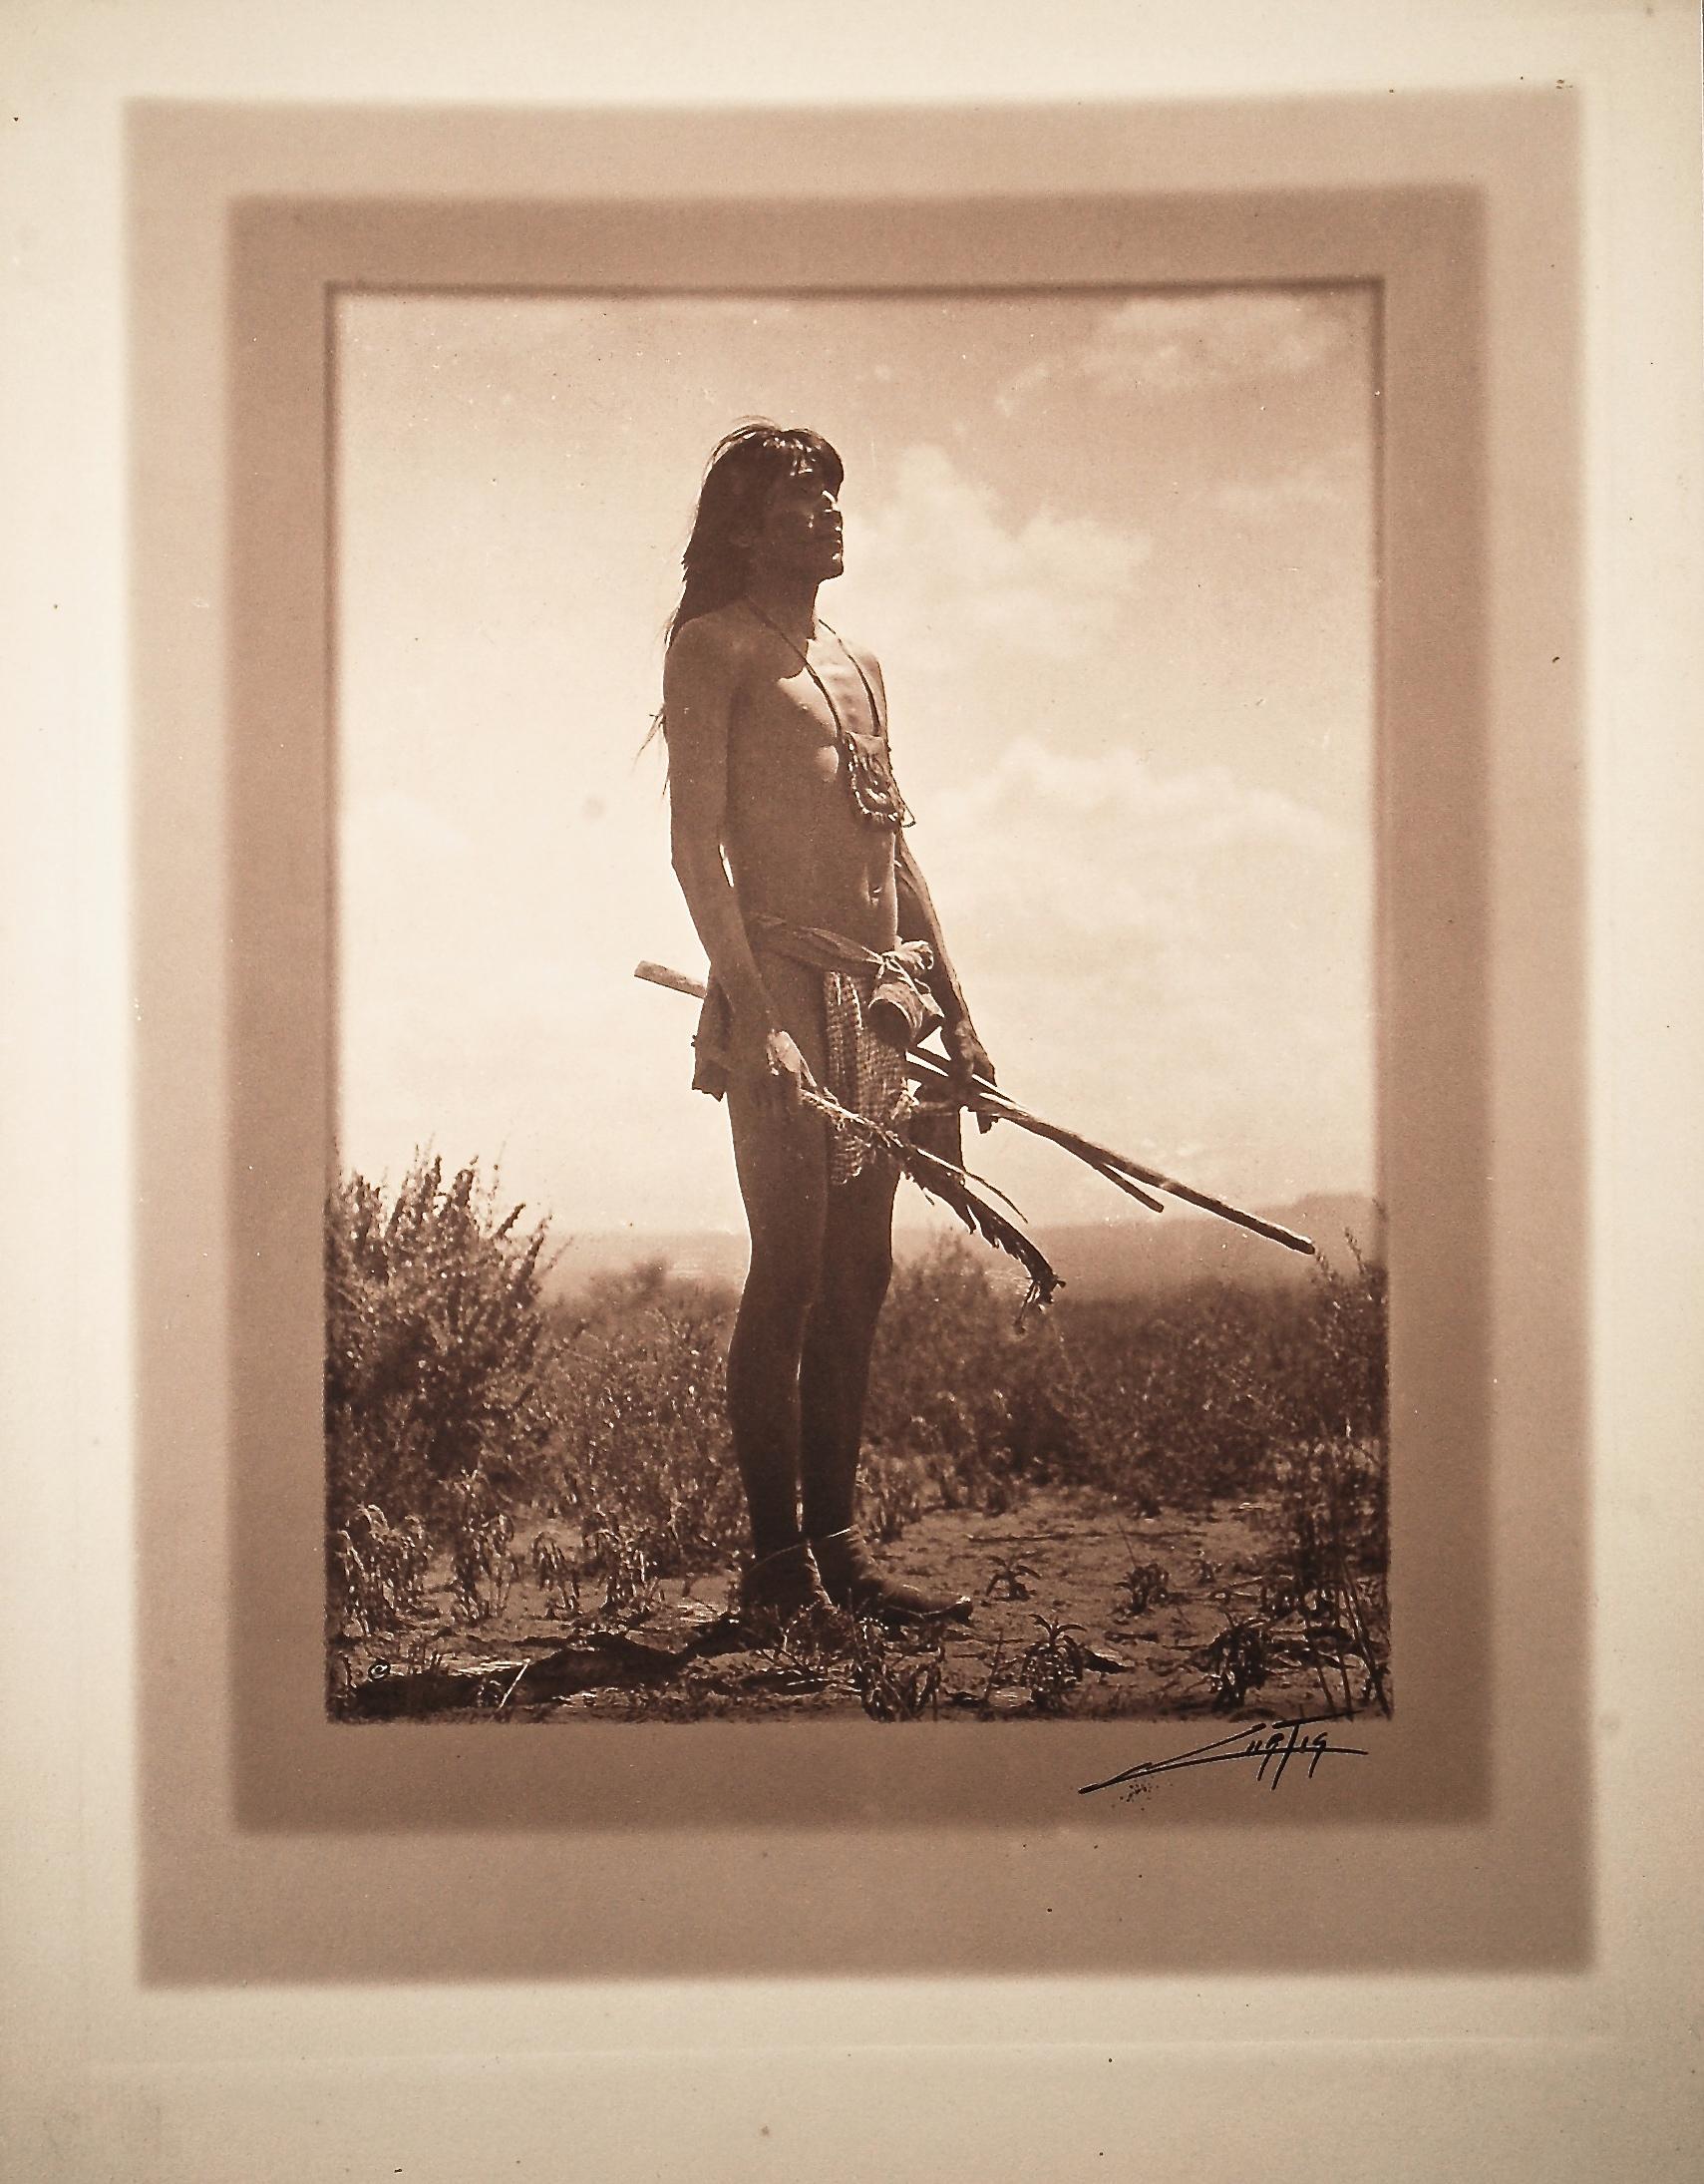 Prayer To The Sun By Hopi Snake Priest, Silver Gelatin Double Border Print, 1907 - Photograph by Edward S. Curtis